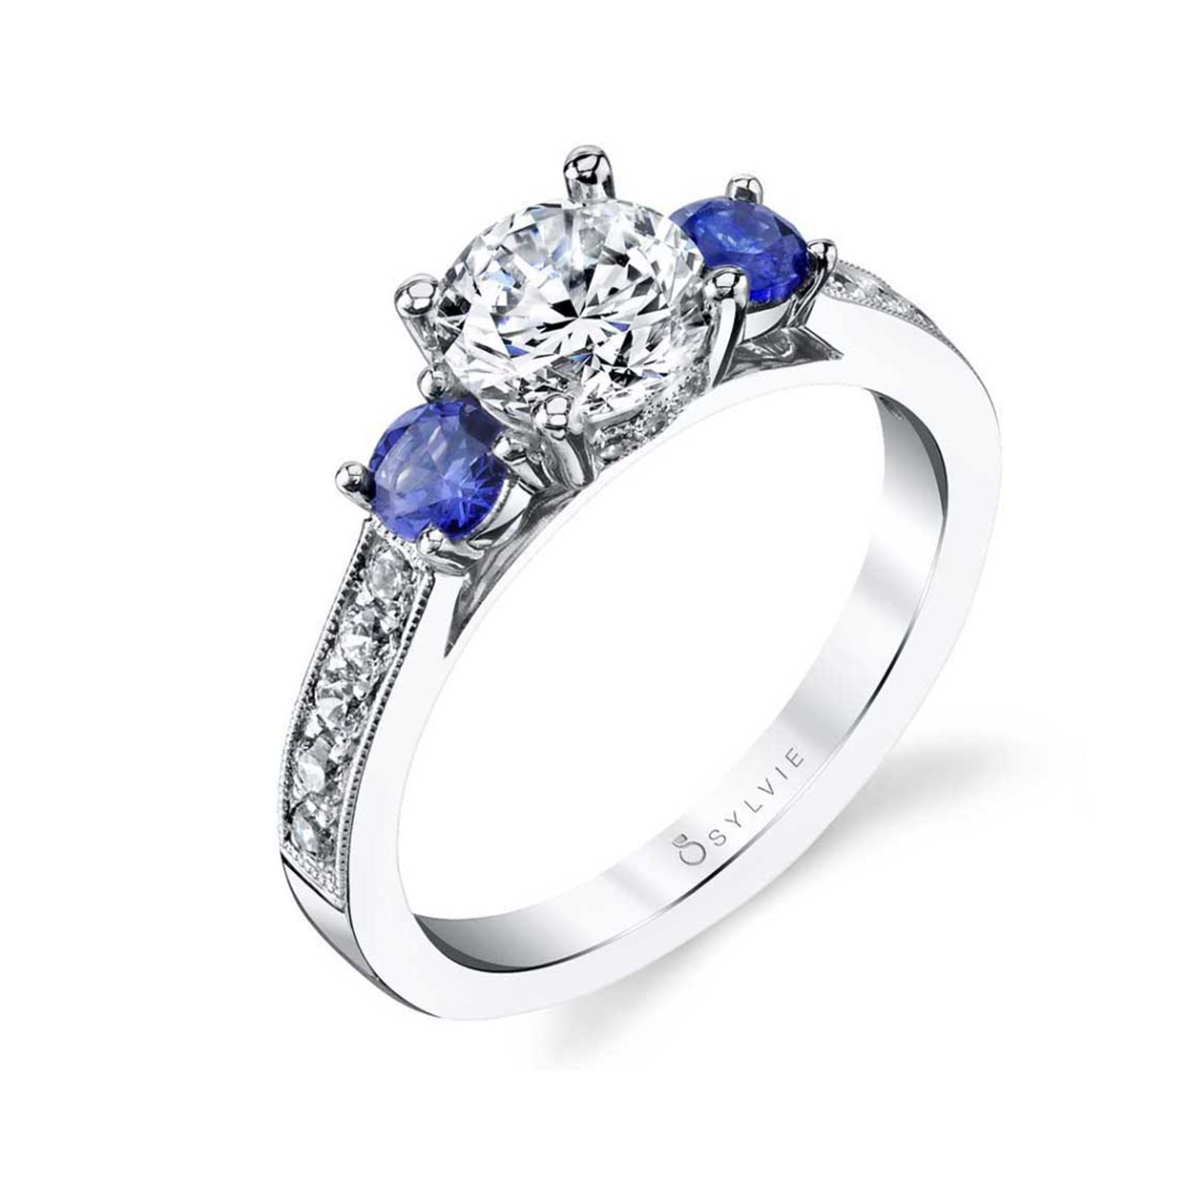 14K White Gold Diamond and Sapphire Ring Mounting